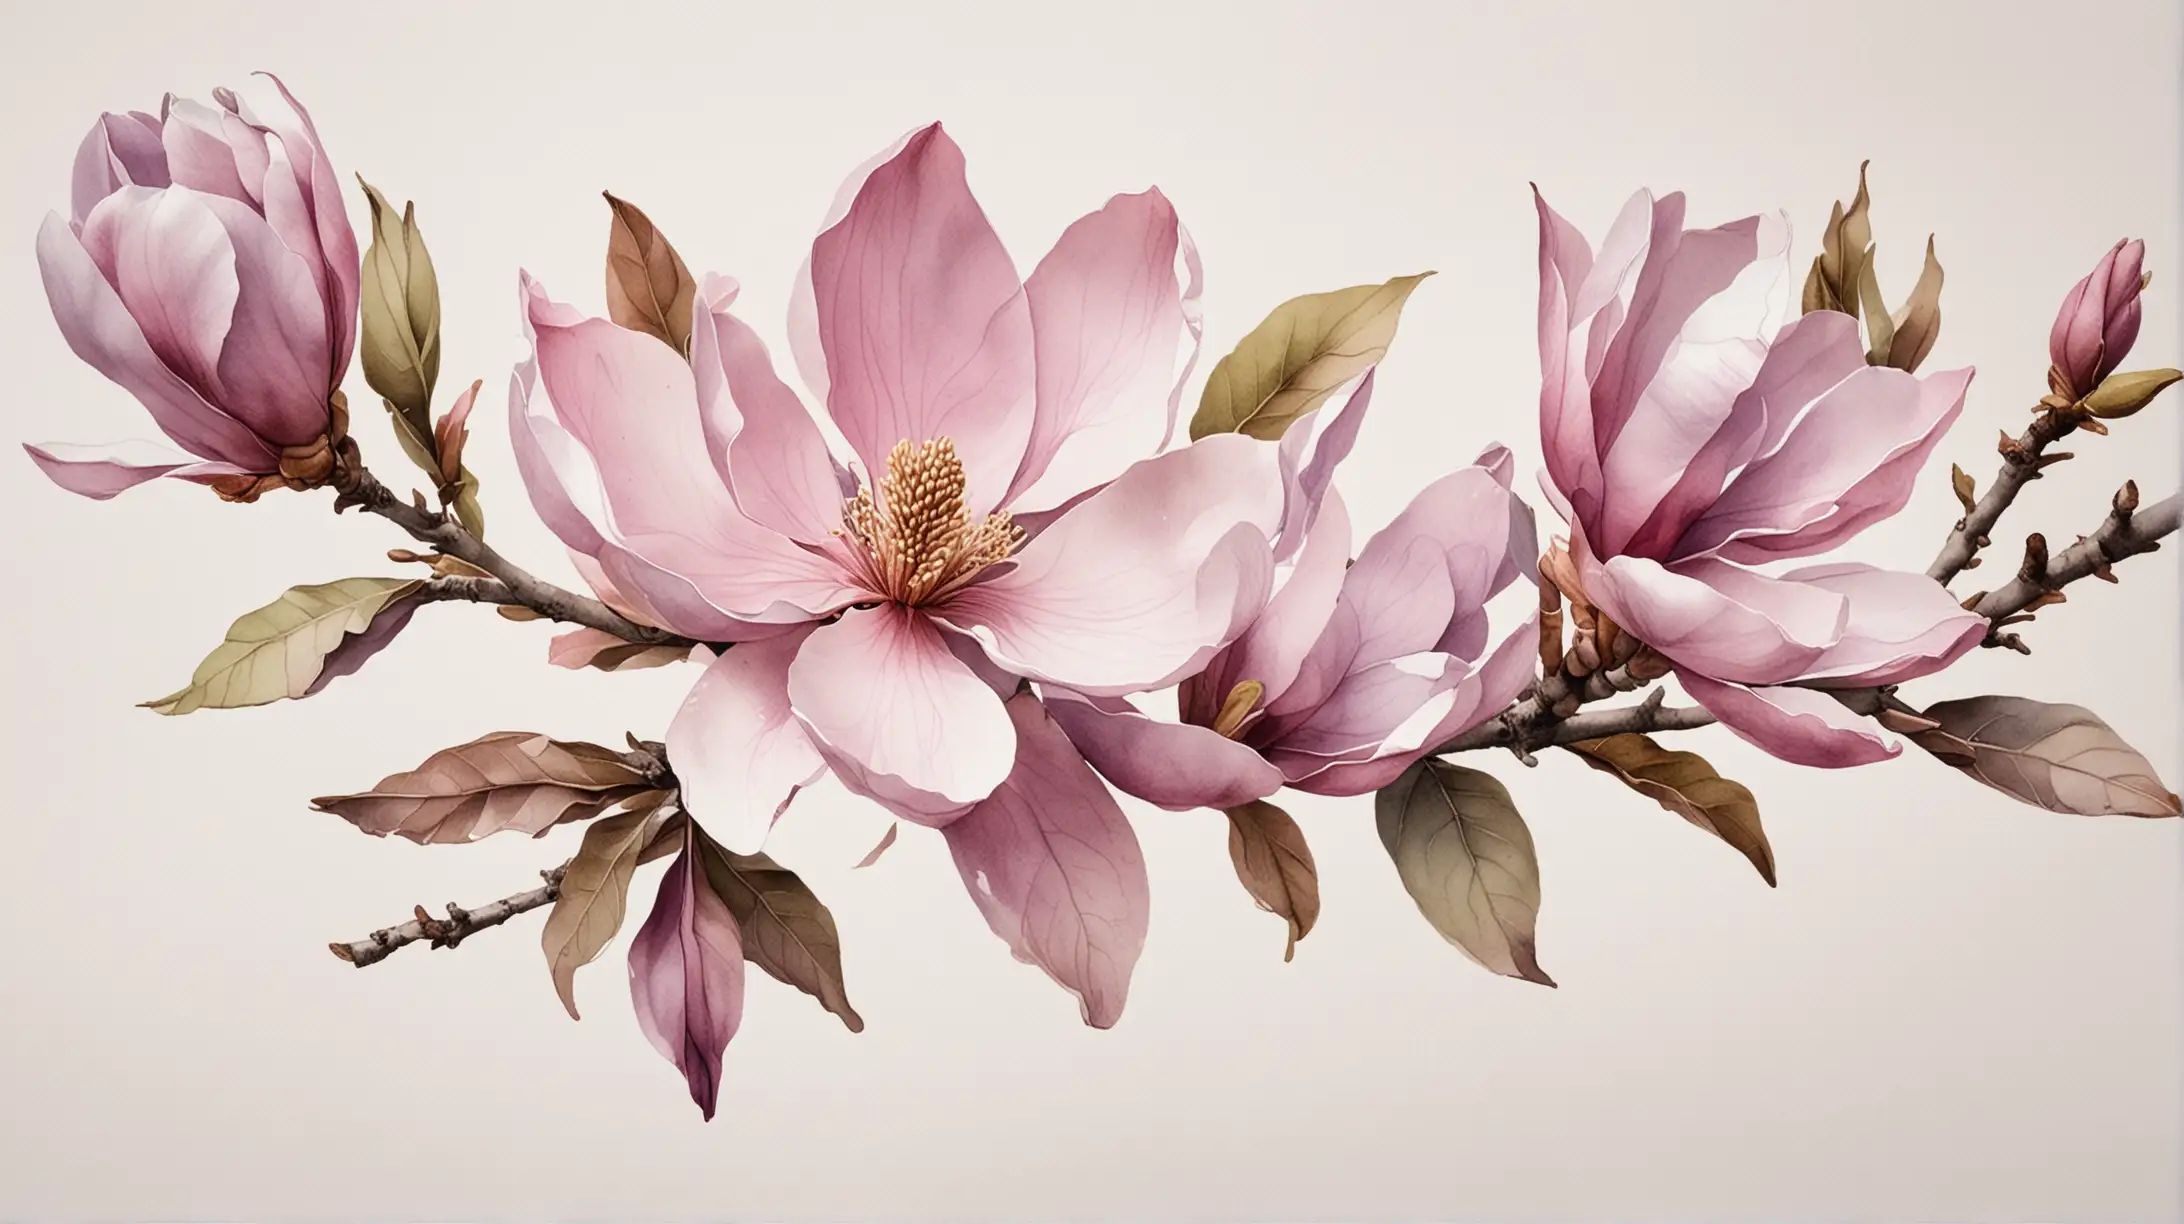 Watercolor Painting of Mauve Magnolia Flowers on White Background